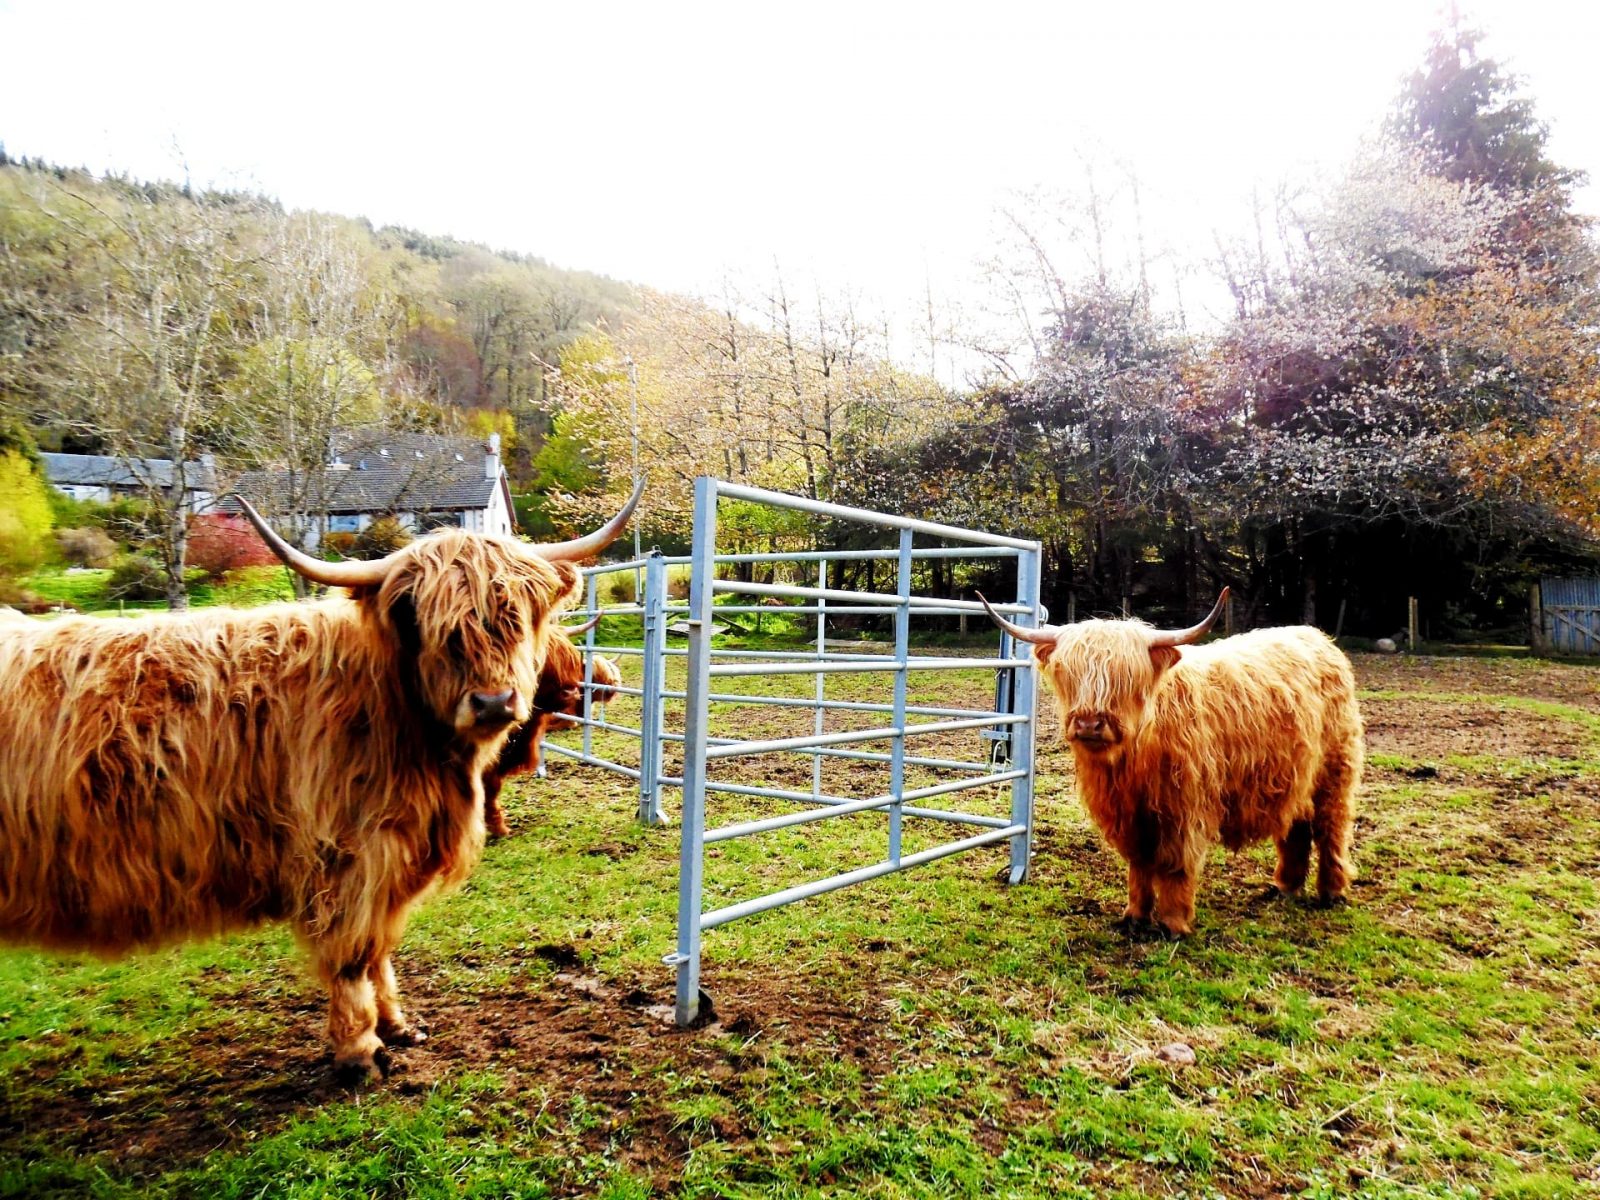 Highland Cattle at Invermoriston - A great stop on a 7 day motorhome itinerary for Scotland